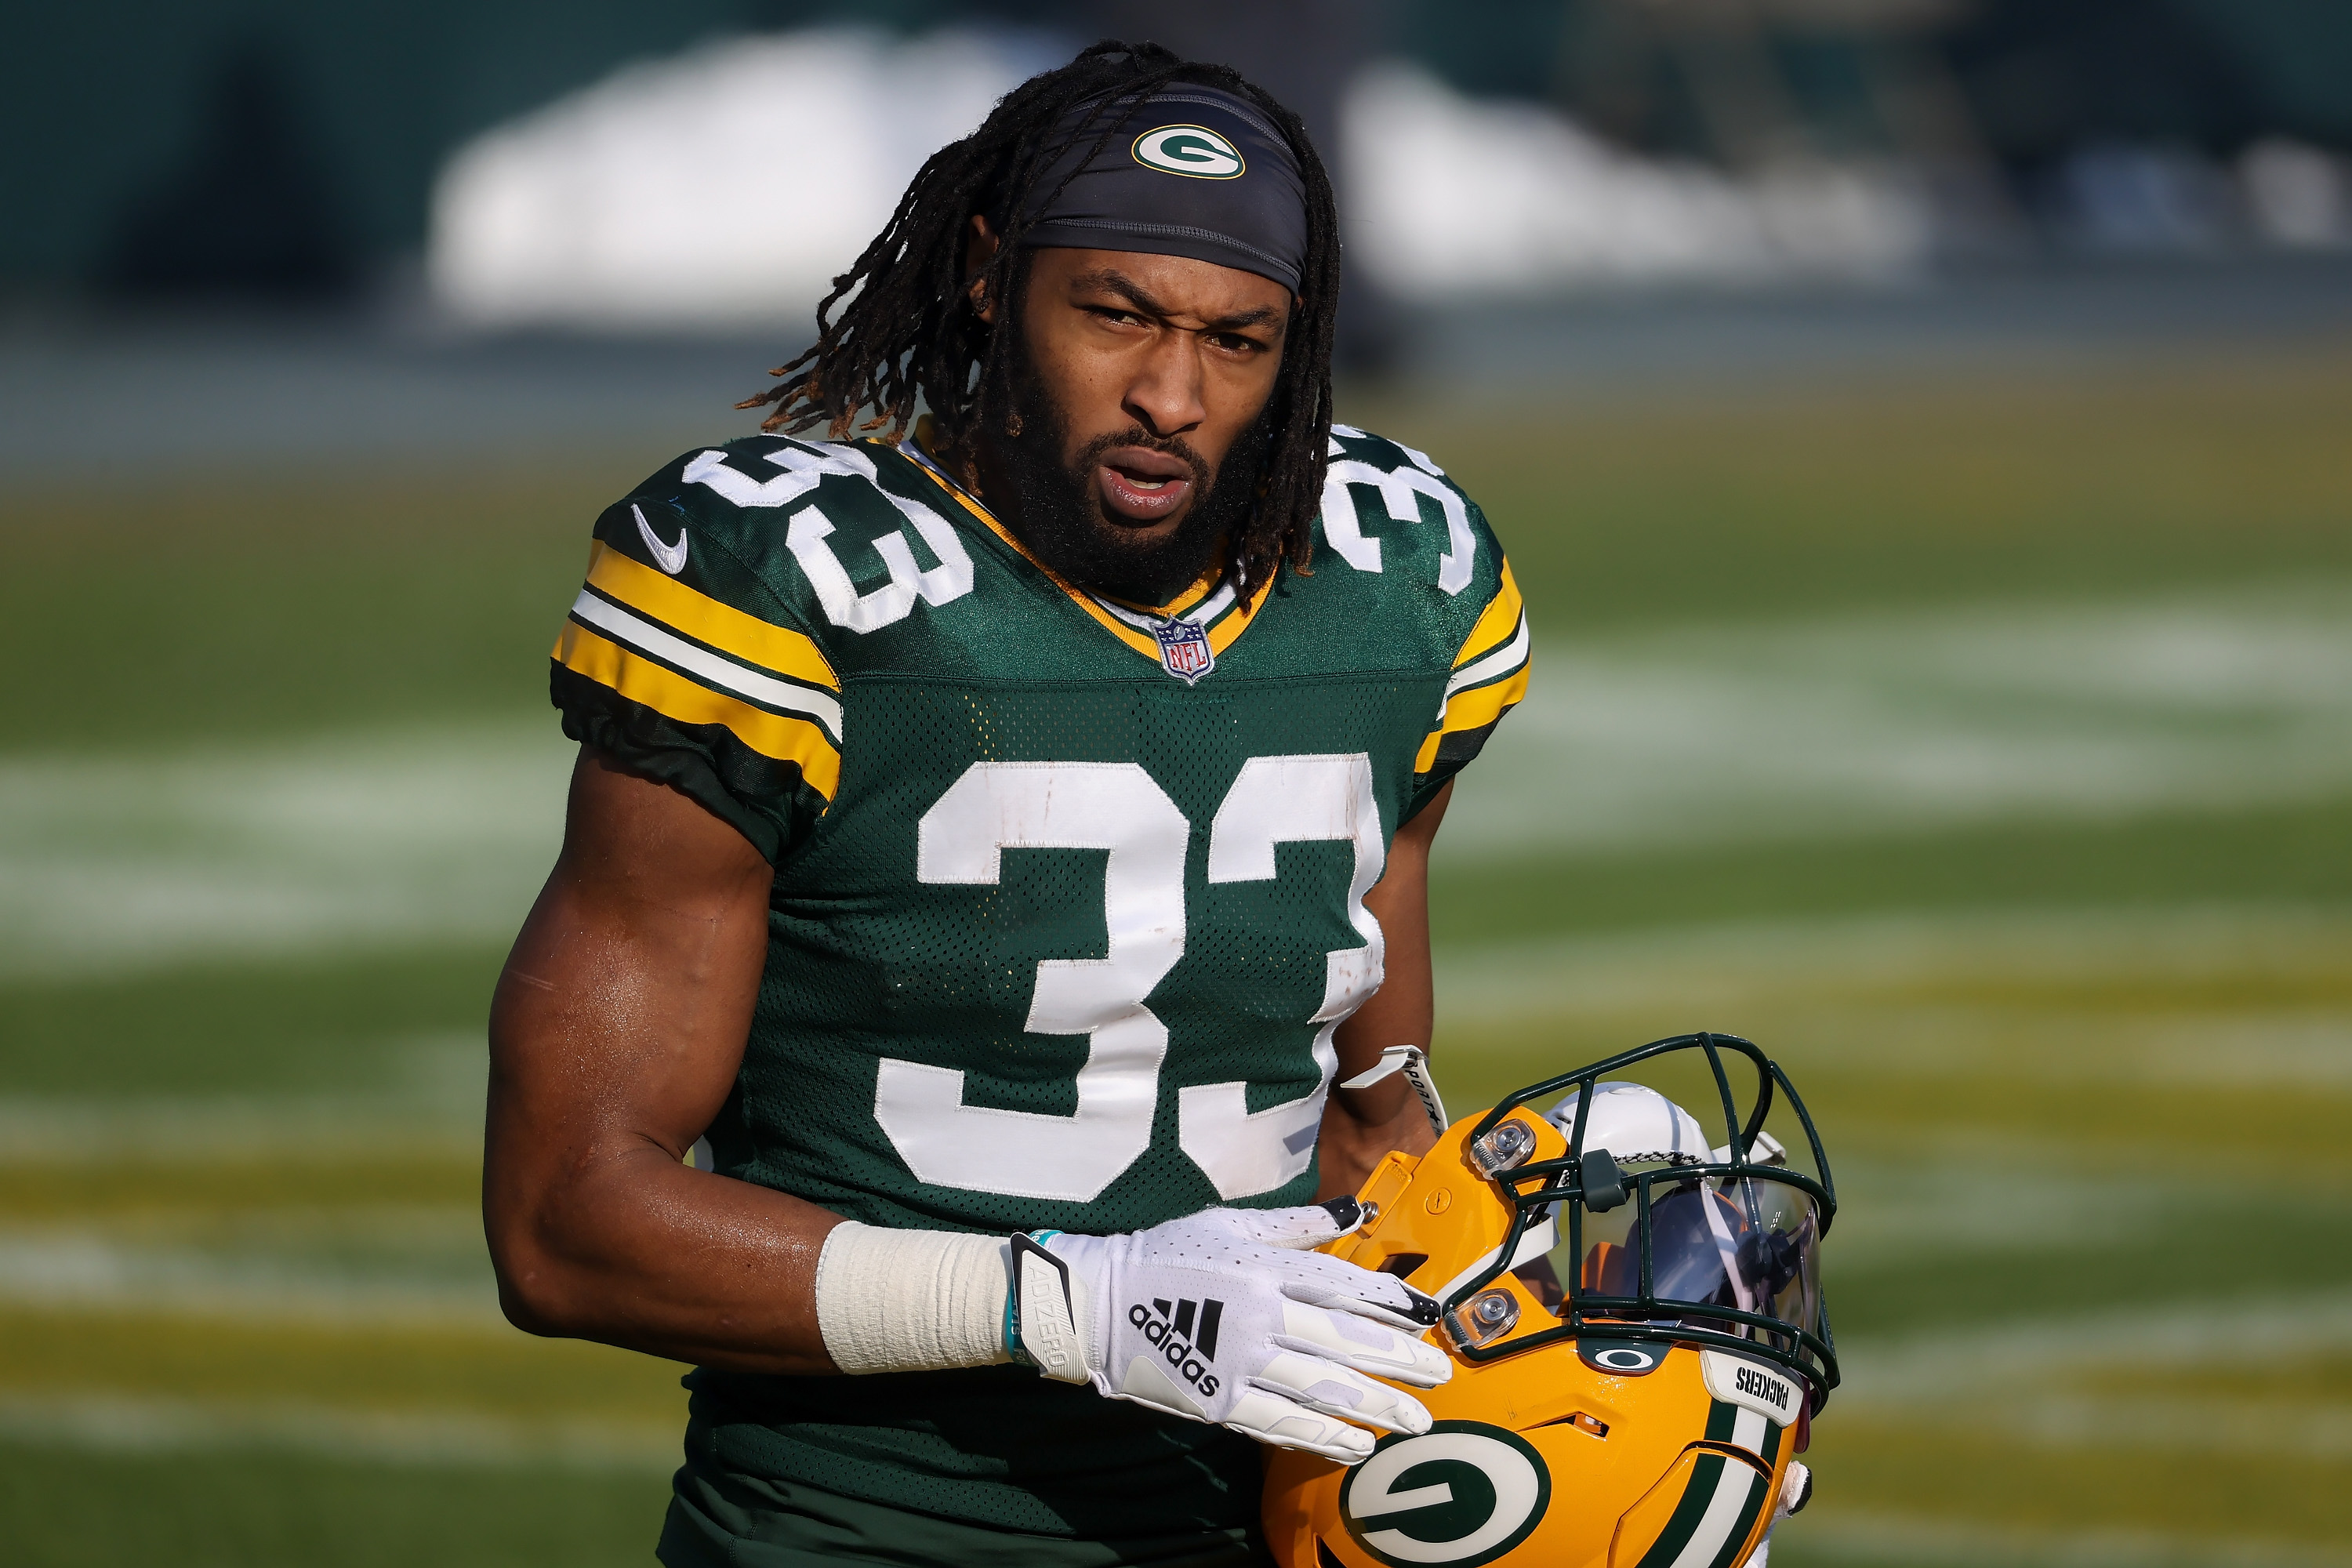 What will the Green Bay Packers do with Aaron Jones?